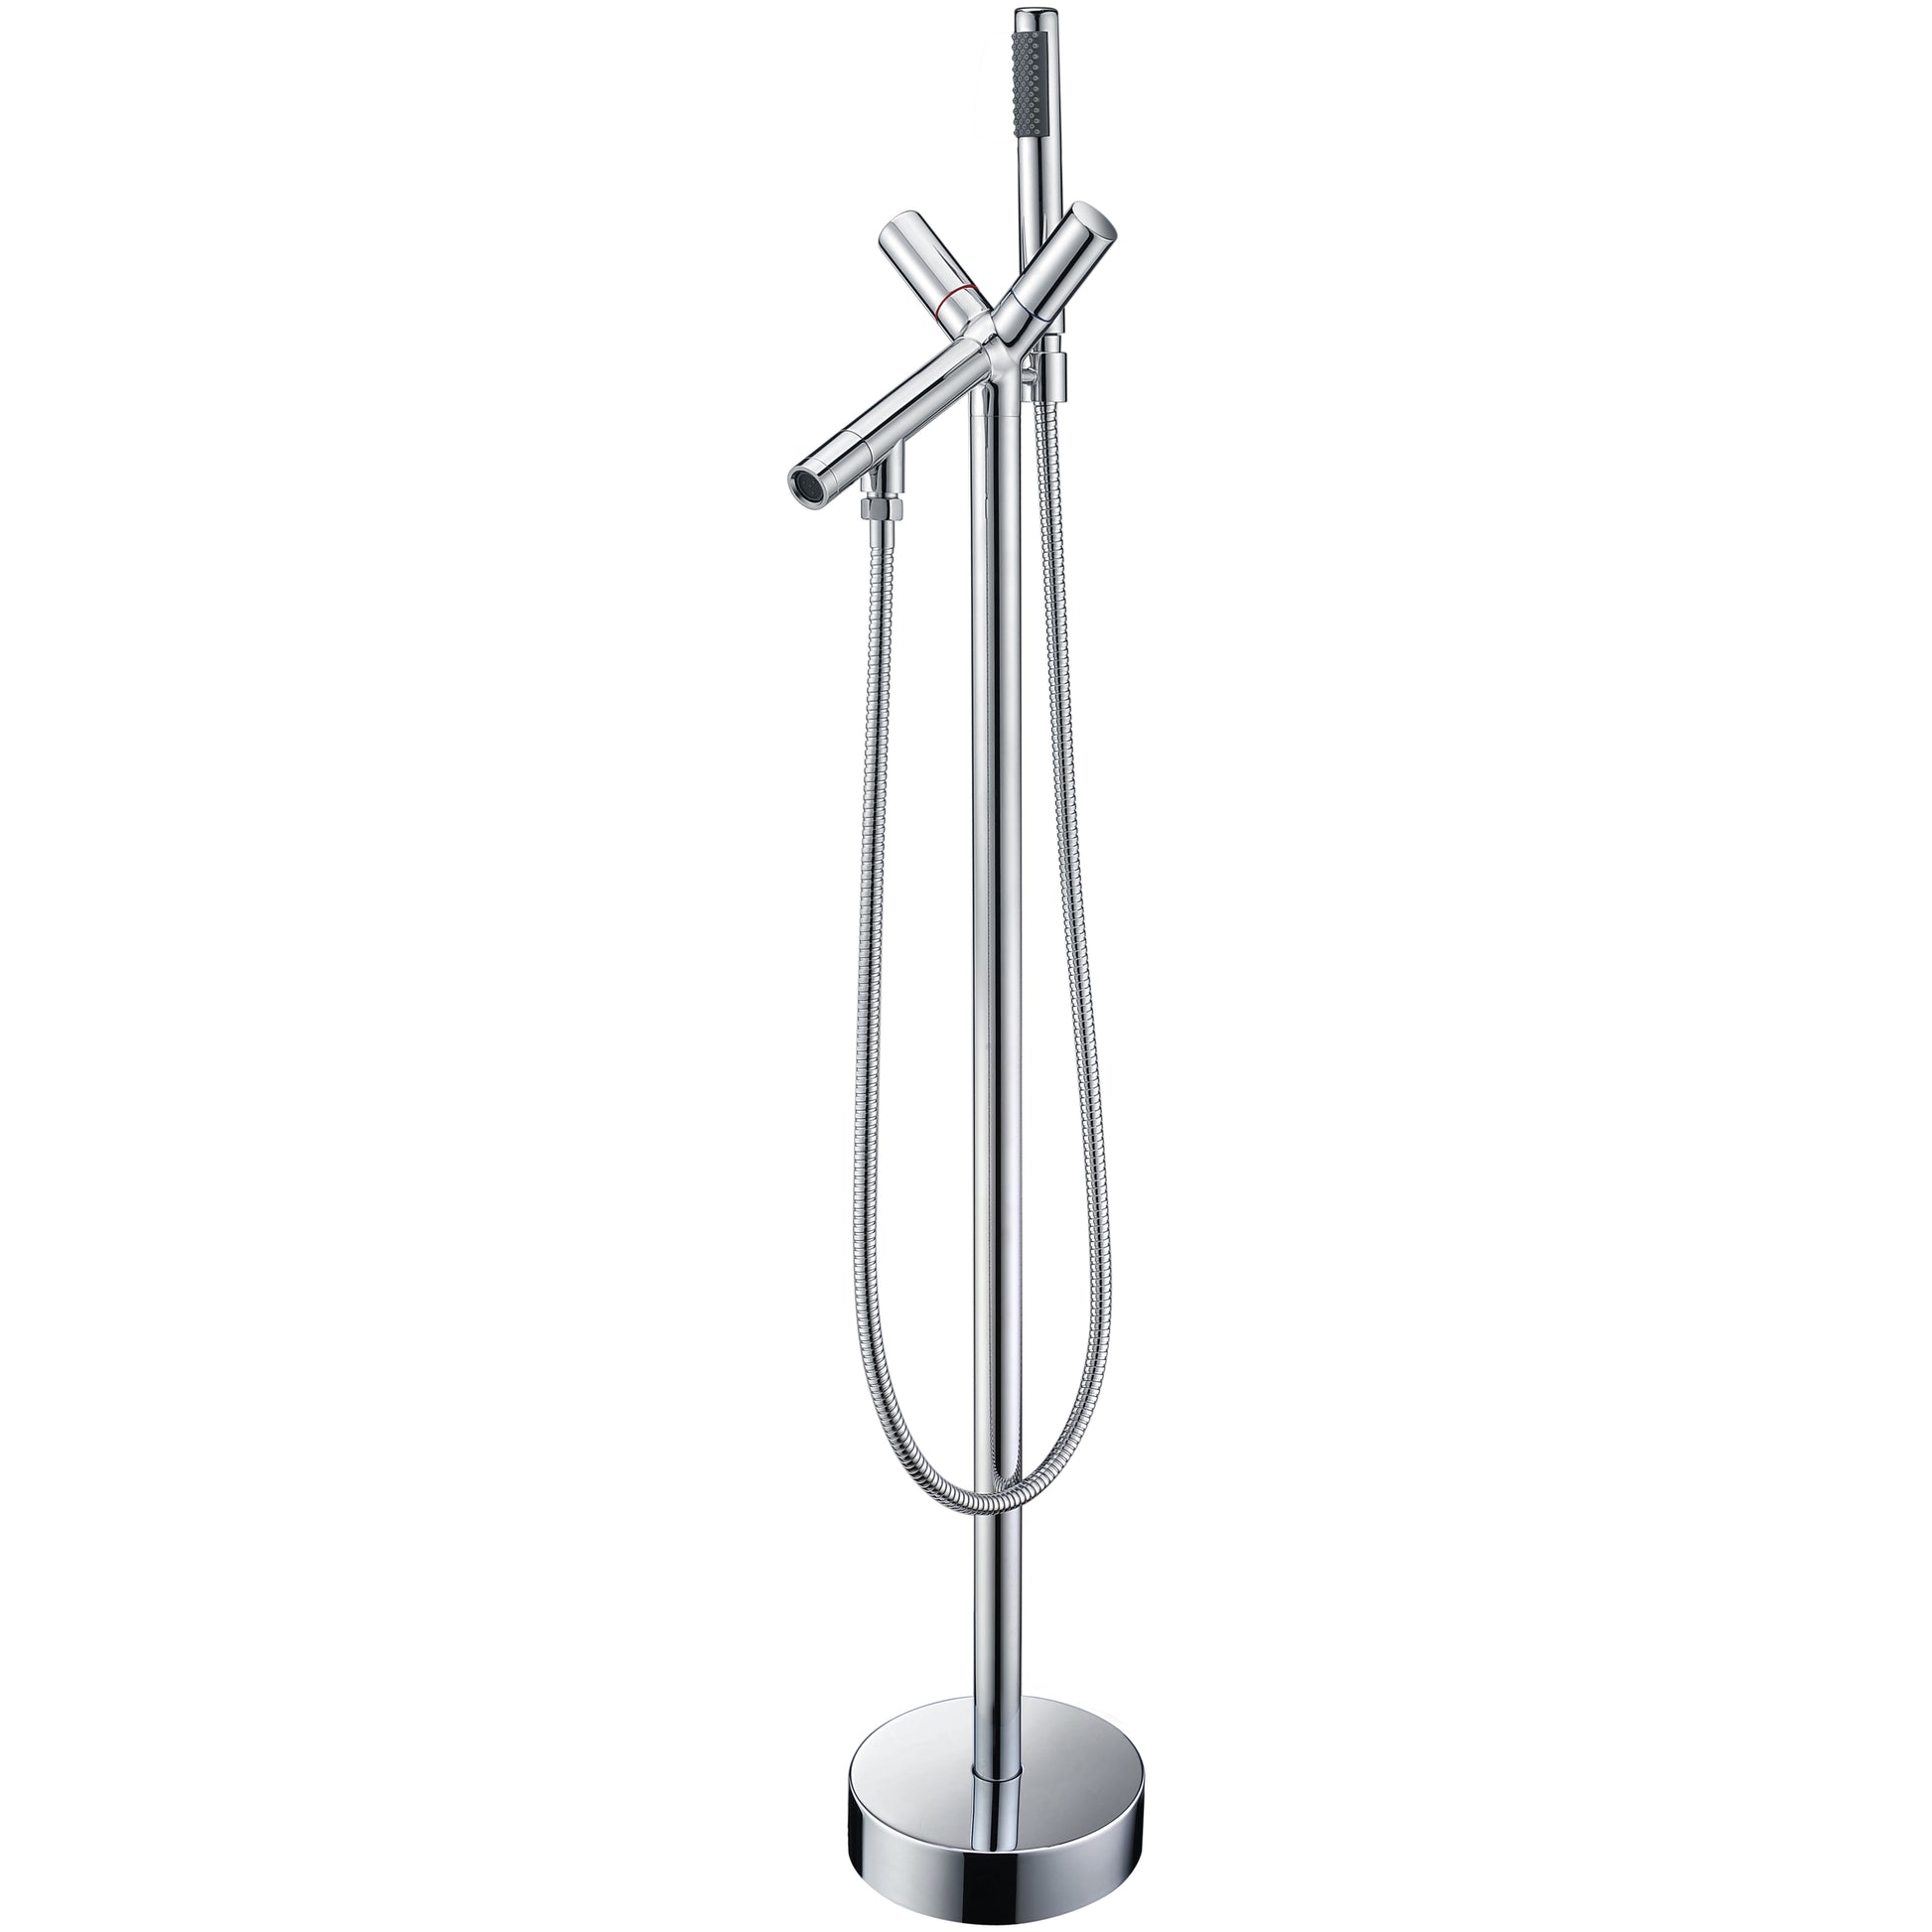 FS-AZ0042CH - Havasu 2-Handle Claw Foot Tub Faucet with Hand Shower in Polished Chrome